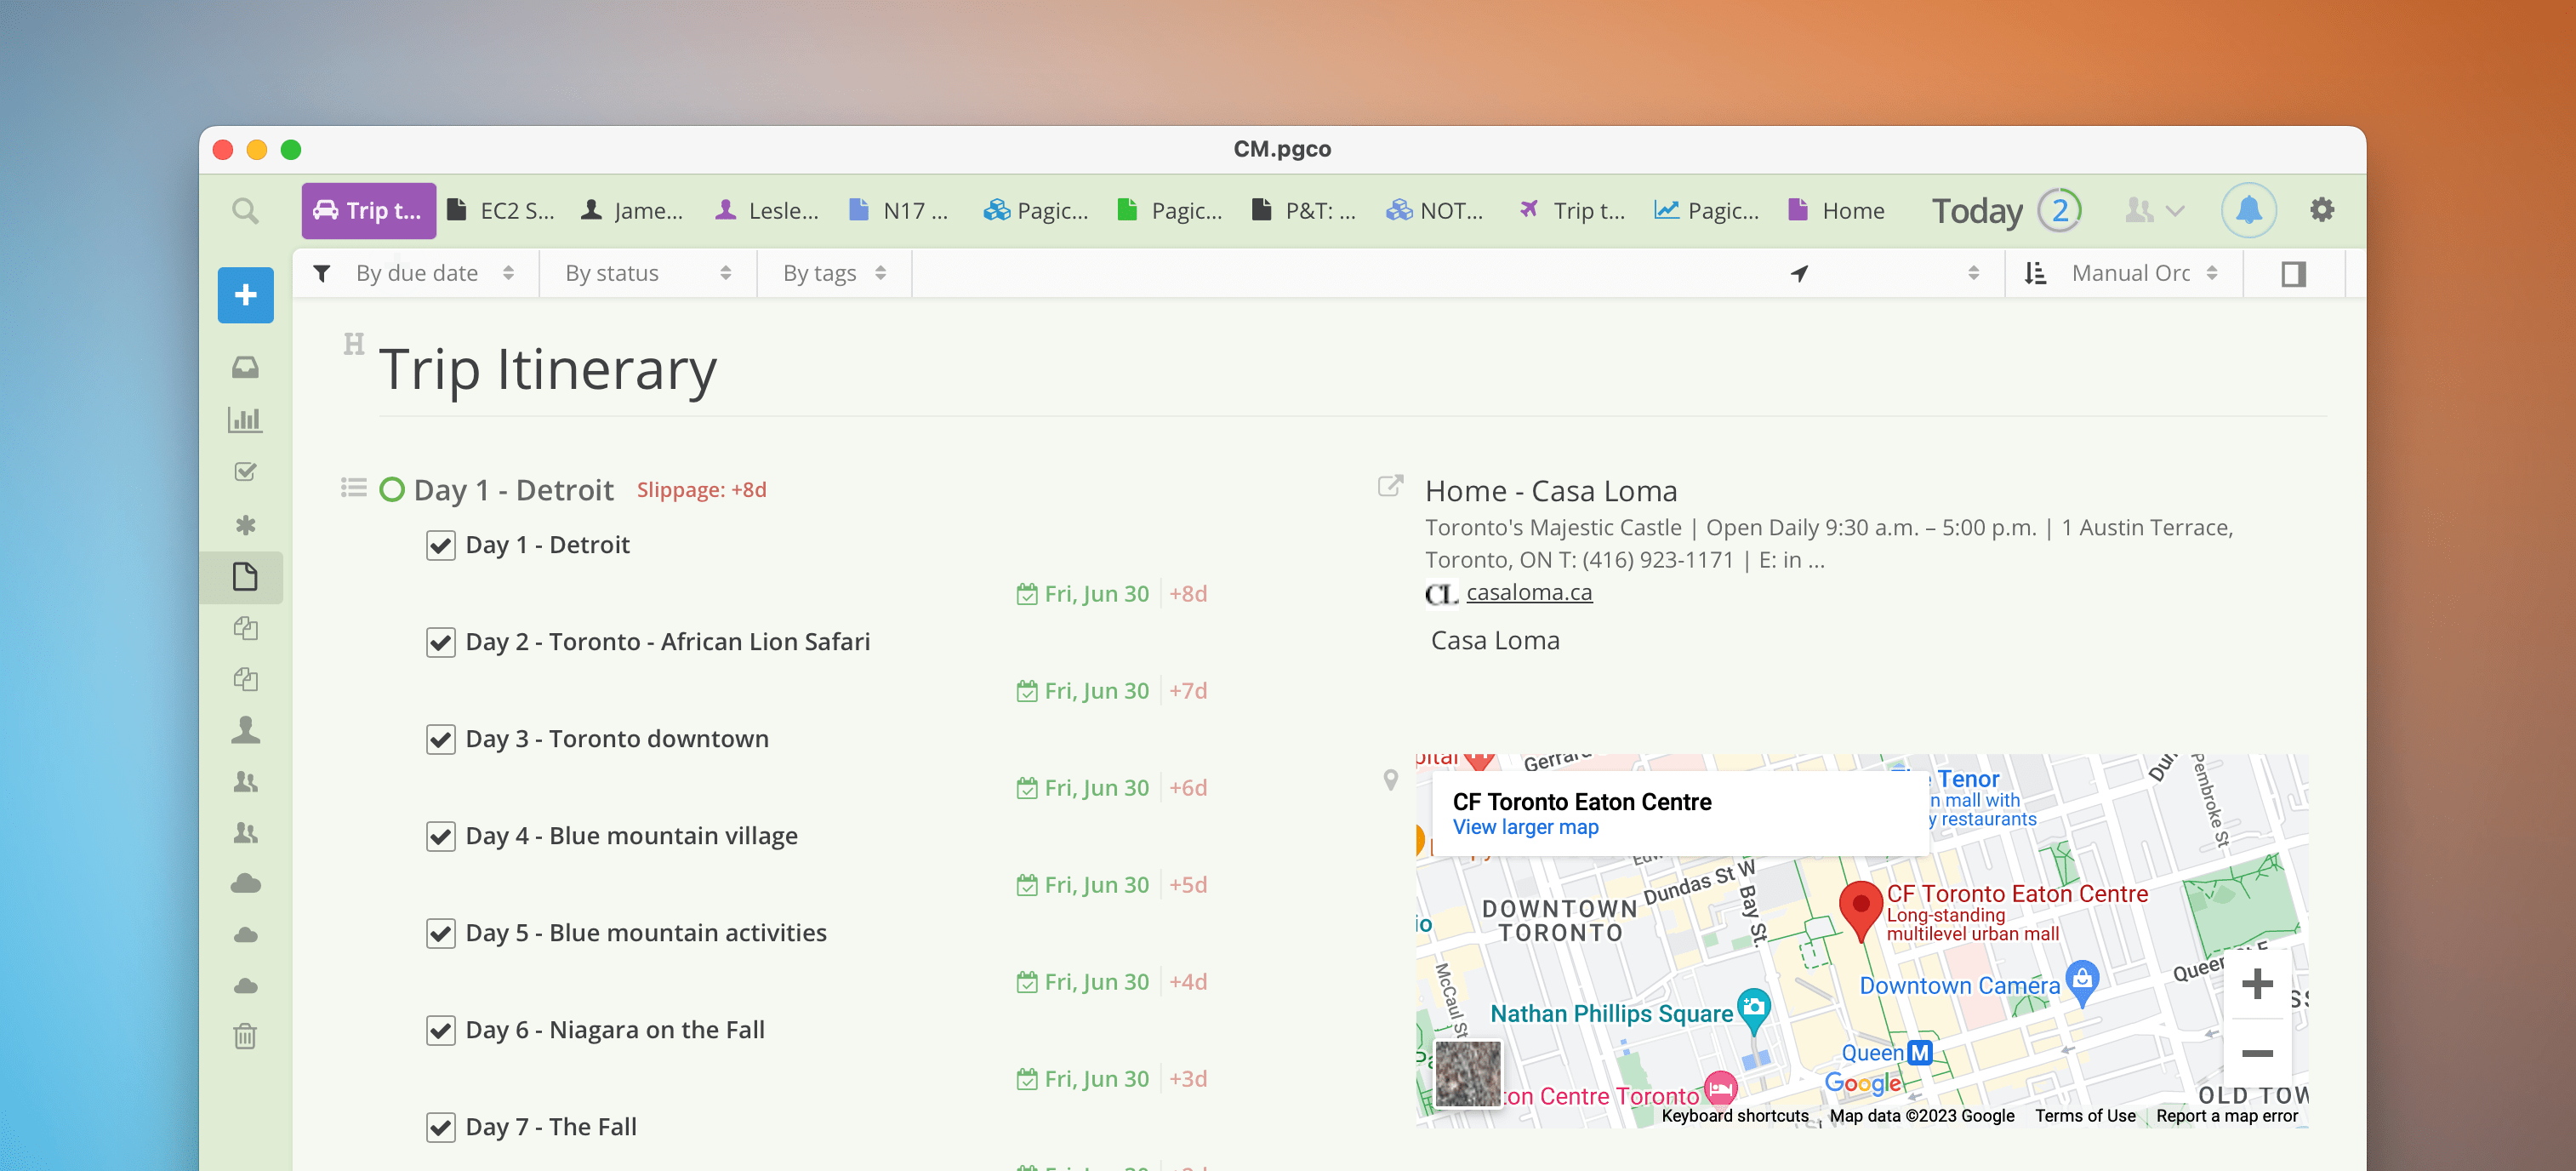 Manage tasks, notes, lists, maps, links, everything by projects and contacts